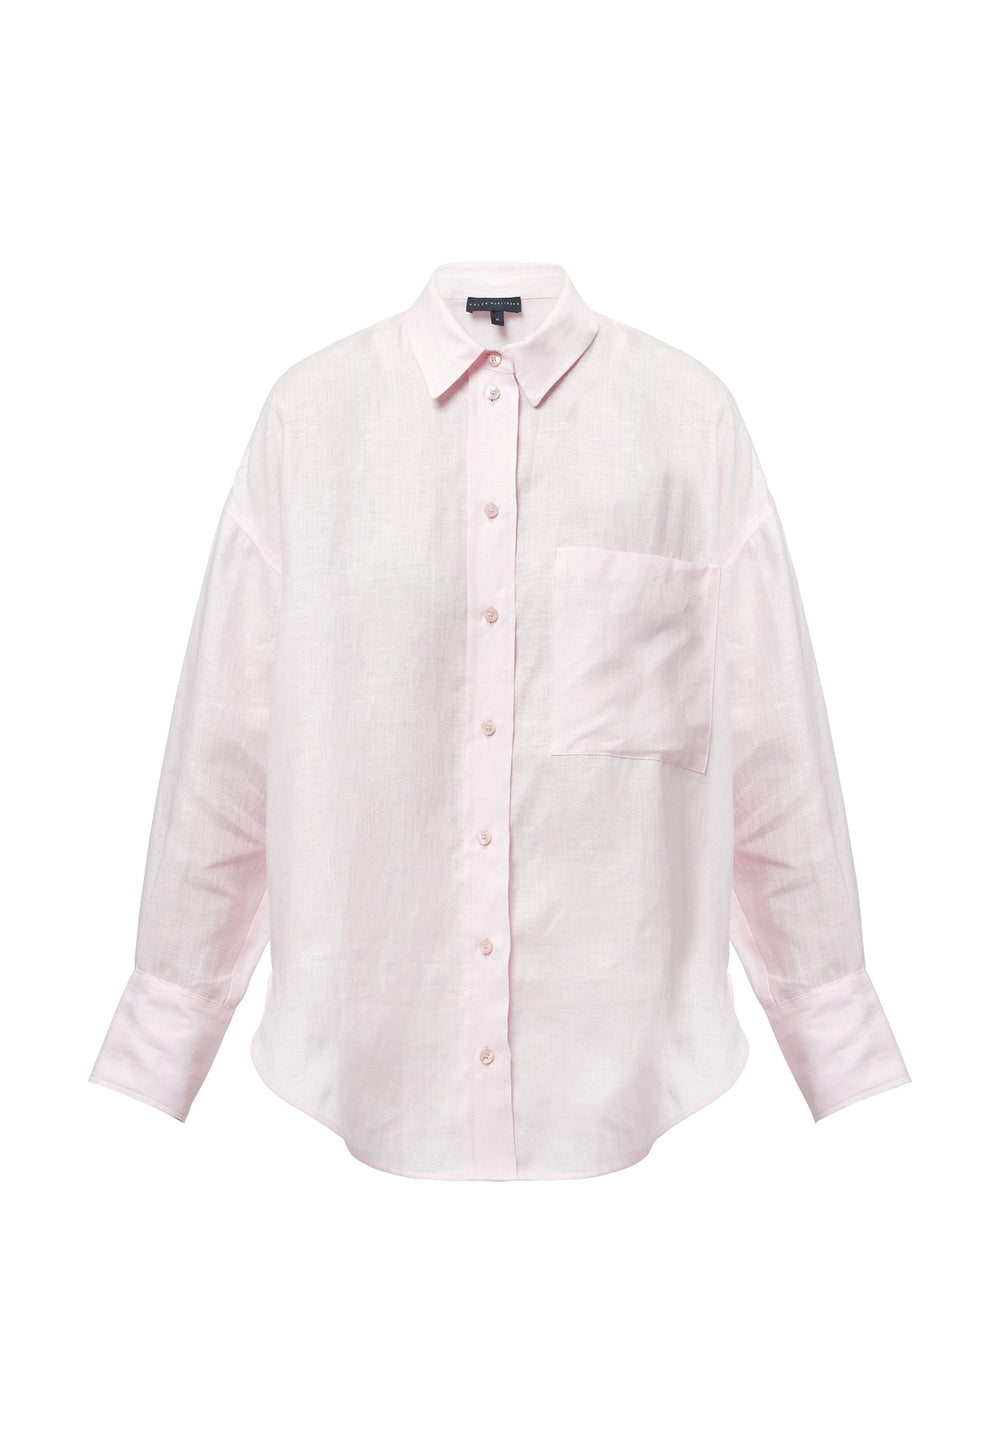 Experience effortless chic with this sustainable linen boyfriend shirt. Featuring an oversized, simplistic design with long sleeves and a classic collar, it exudes timeless appeal. The button-through front and rounded hem combine comfort and style seamlessly, making it a versatile wardrobe staple. Presented in a charming candy pink tone.